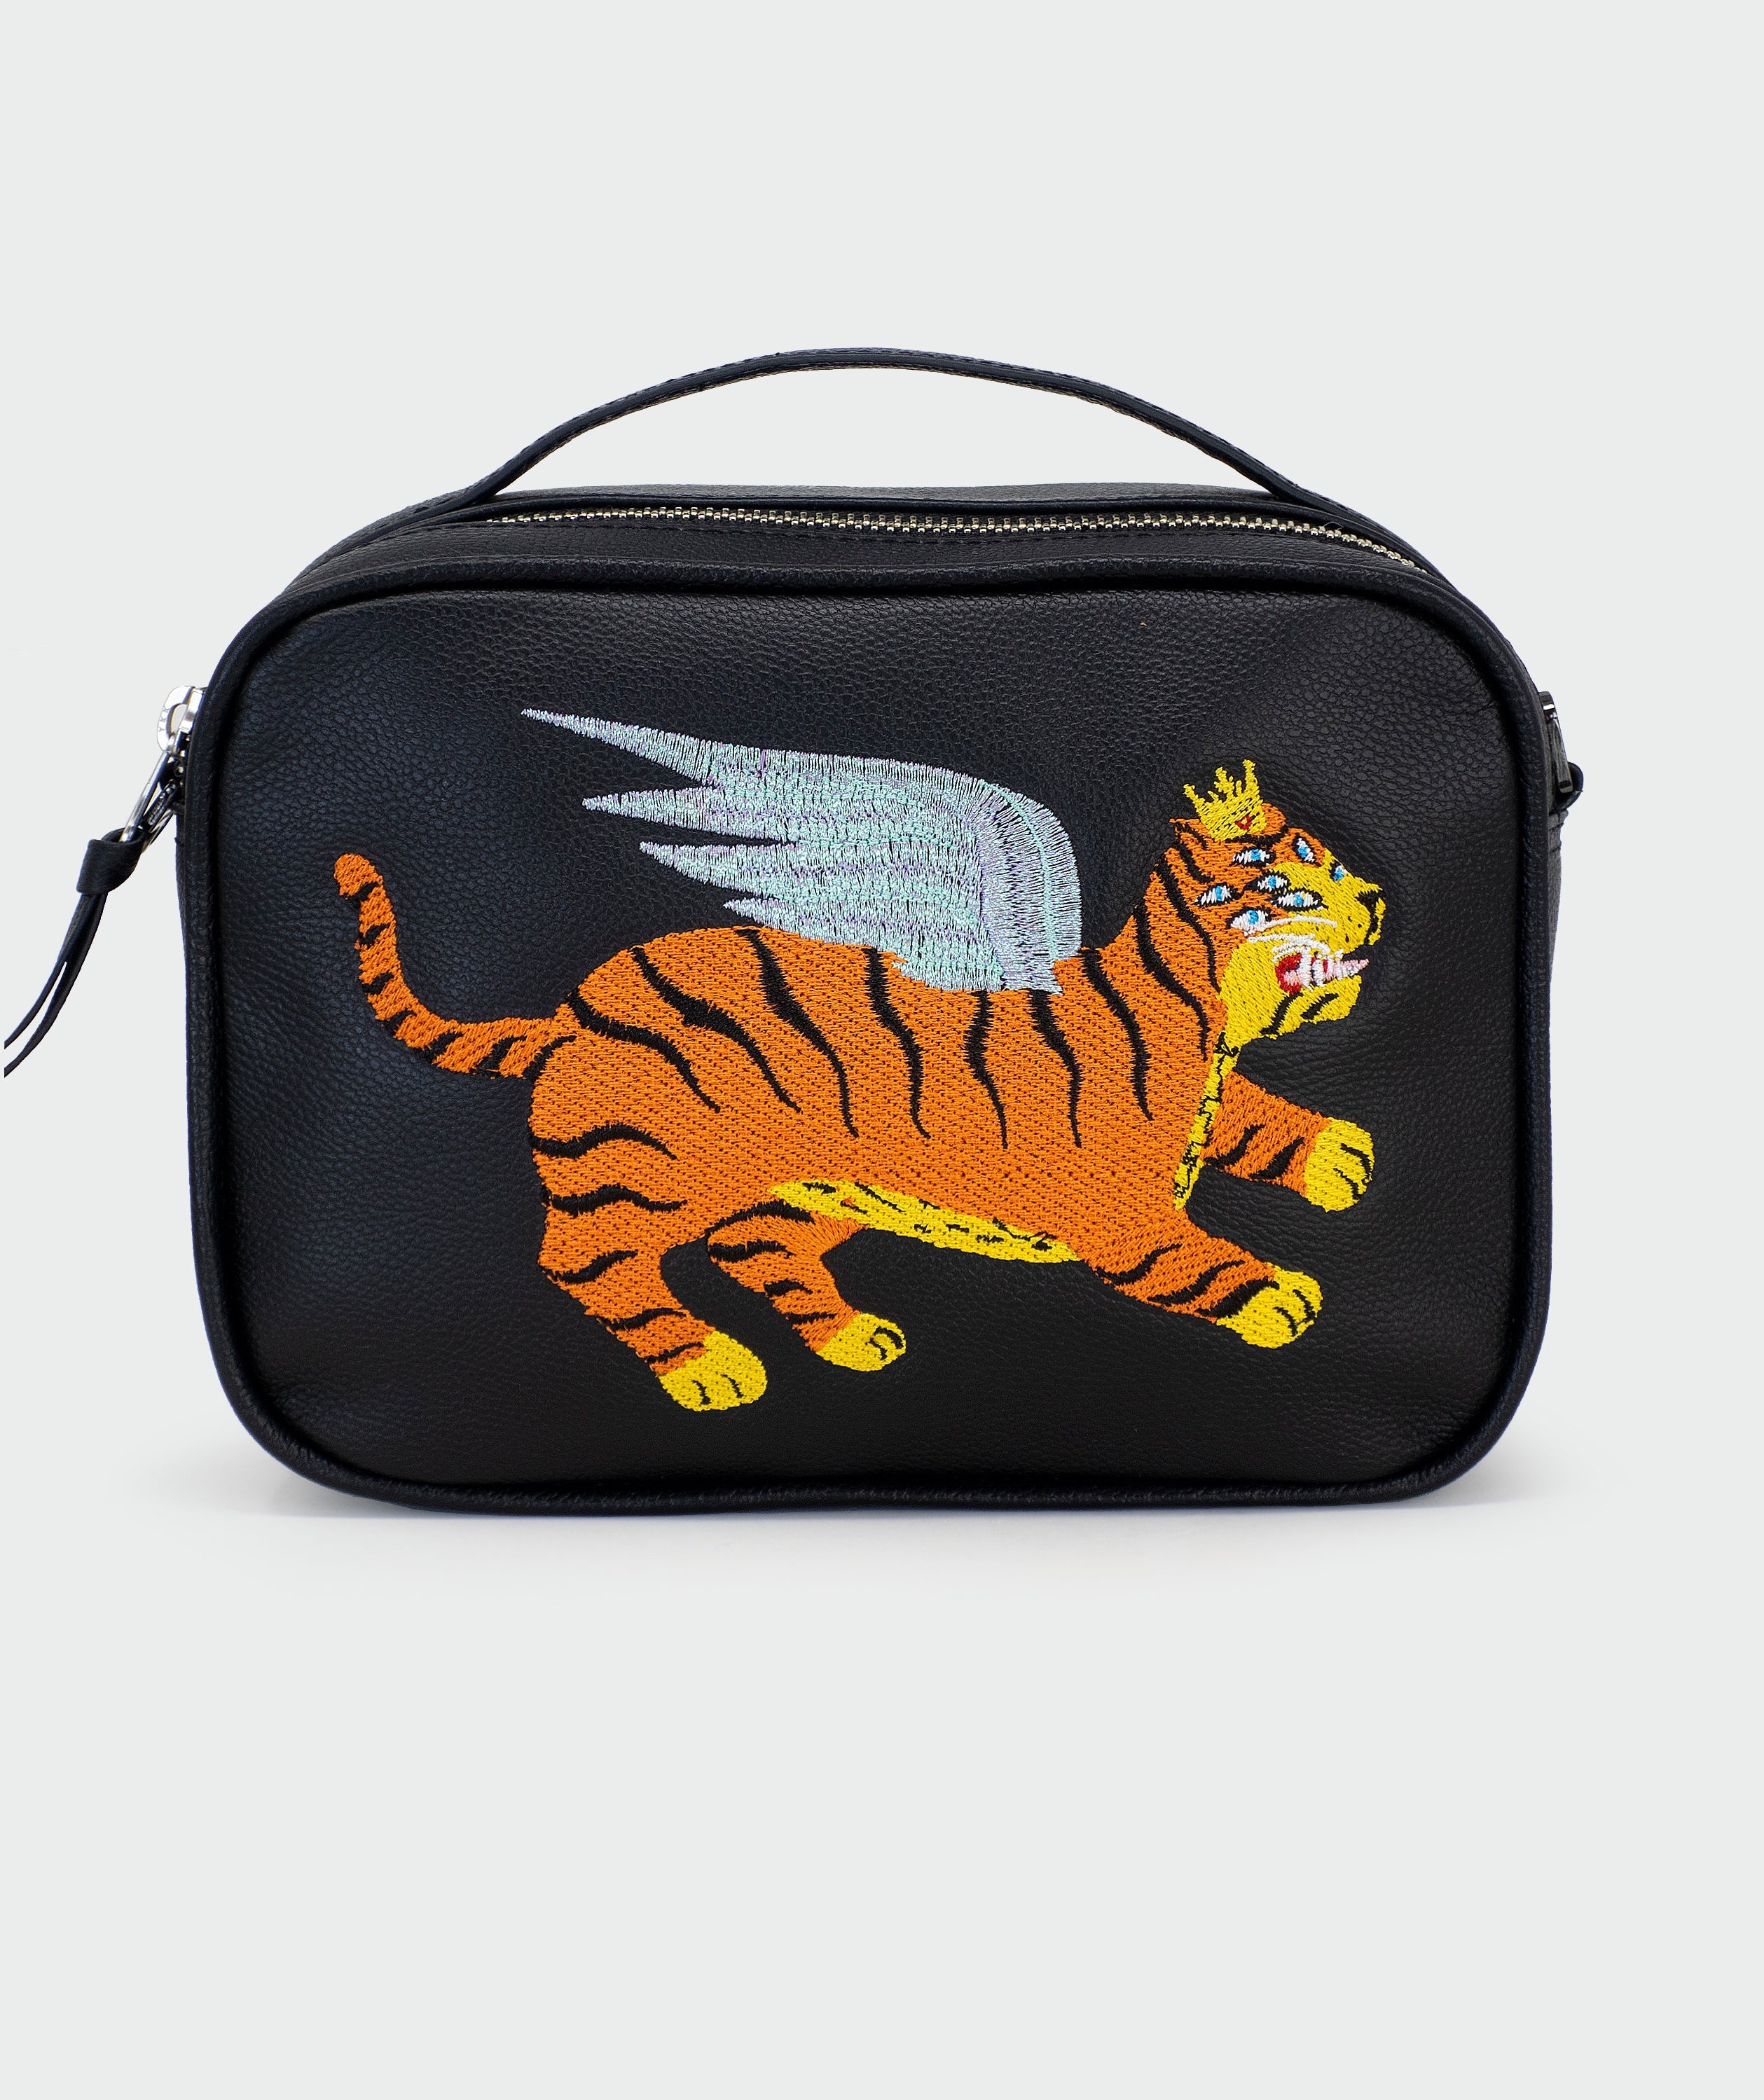 Black Leather Box Bag: Tiger Wings Embroidery | NYC Slow Fashion - Front